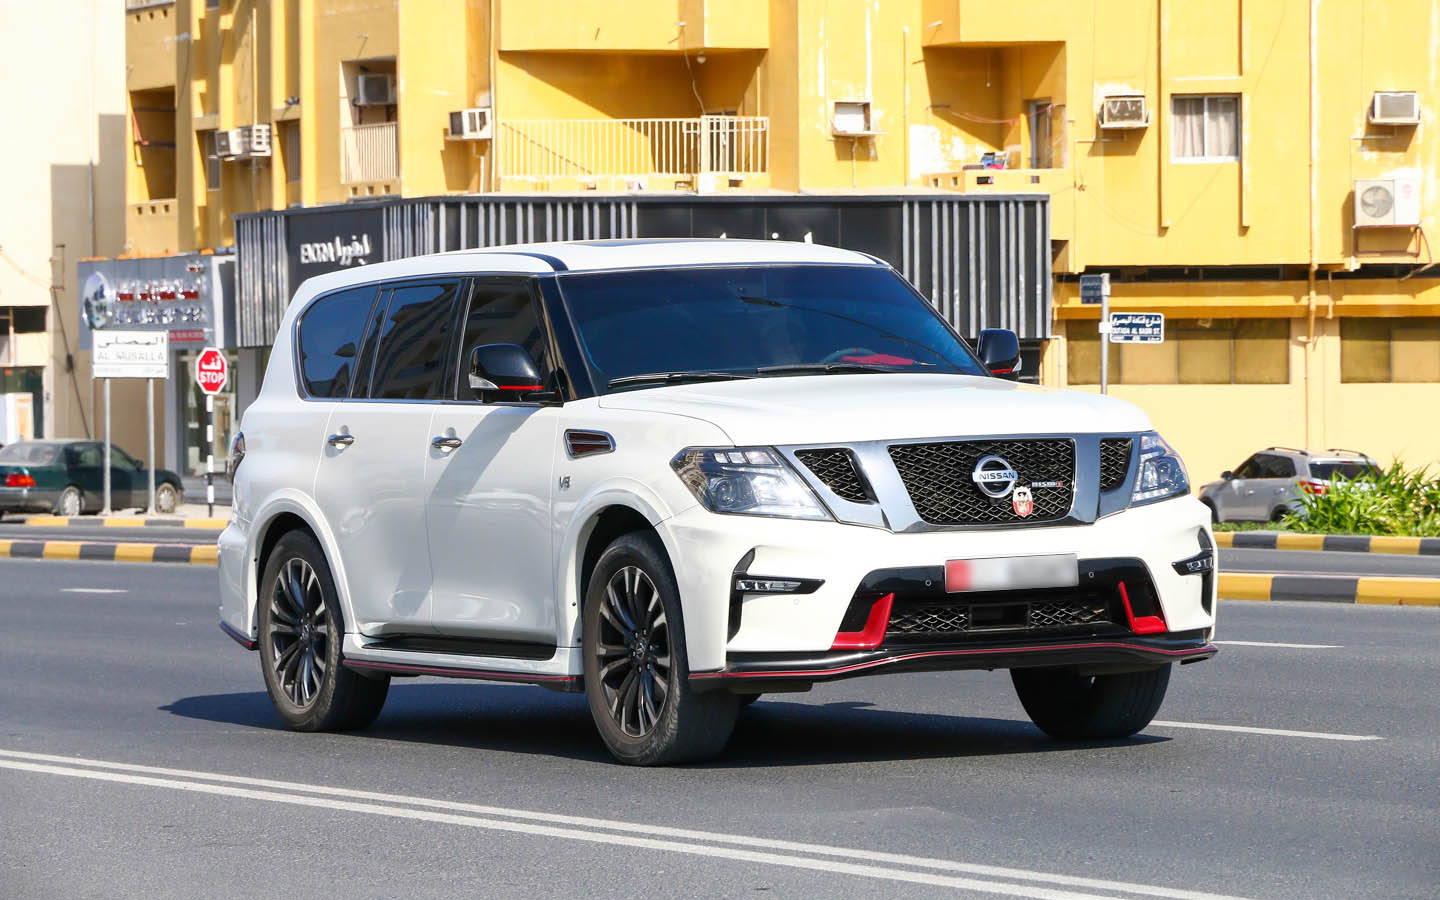 Nissan Patrol History: Generations, Specifications & More